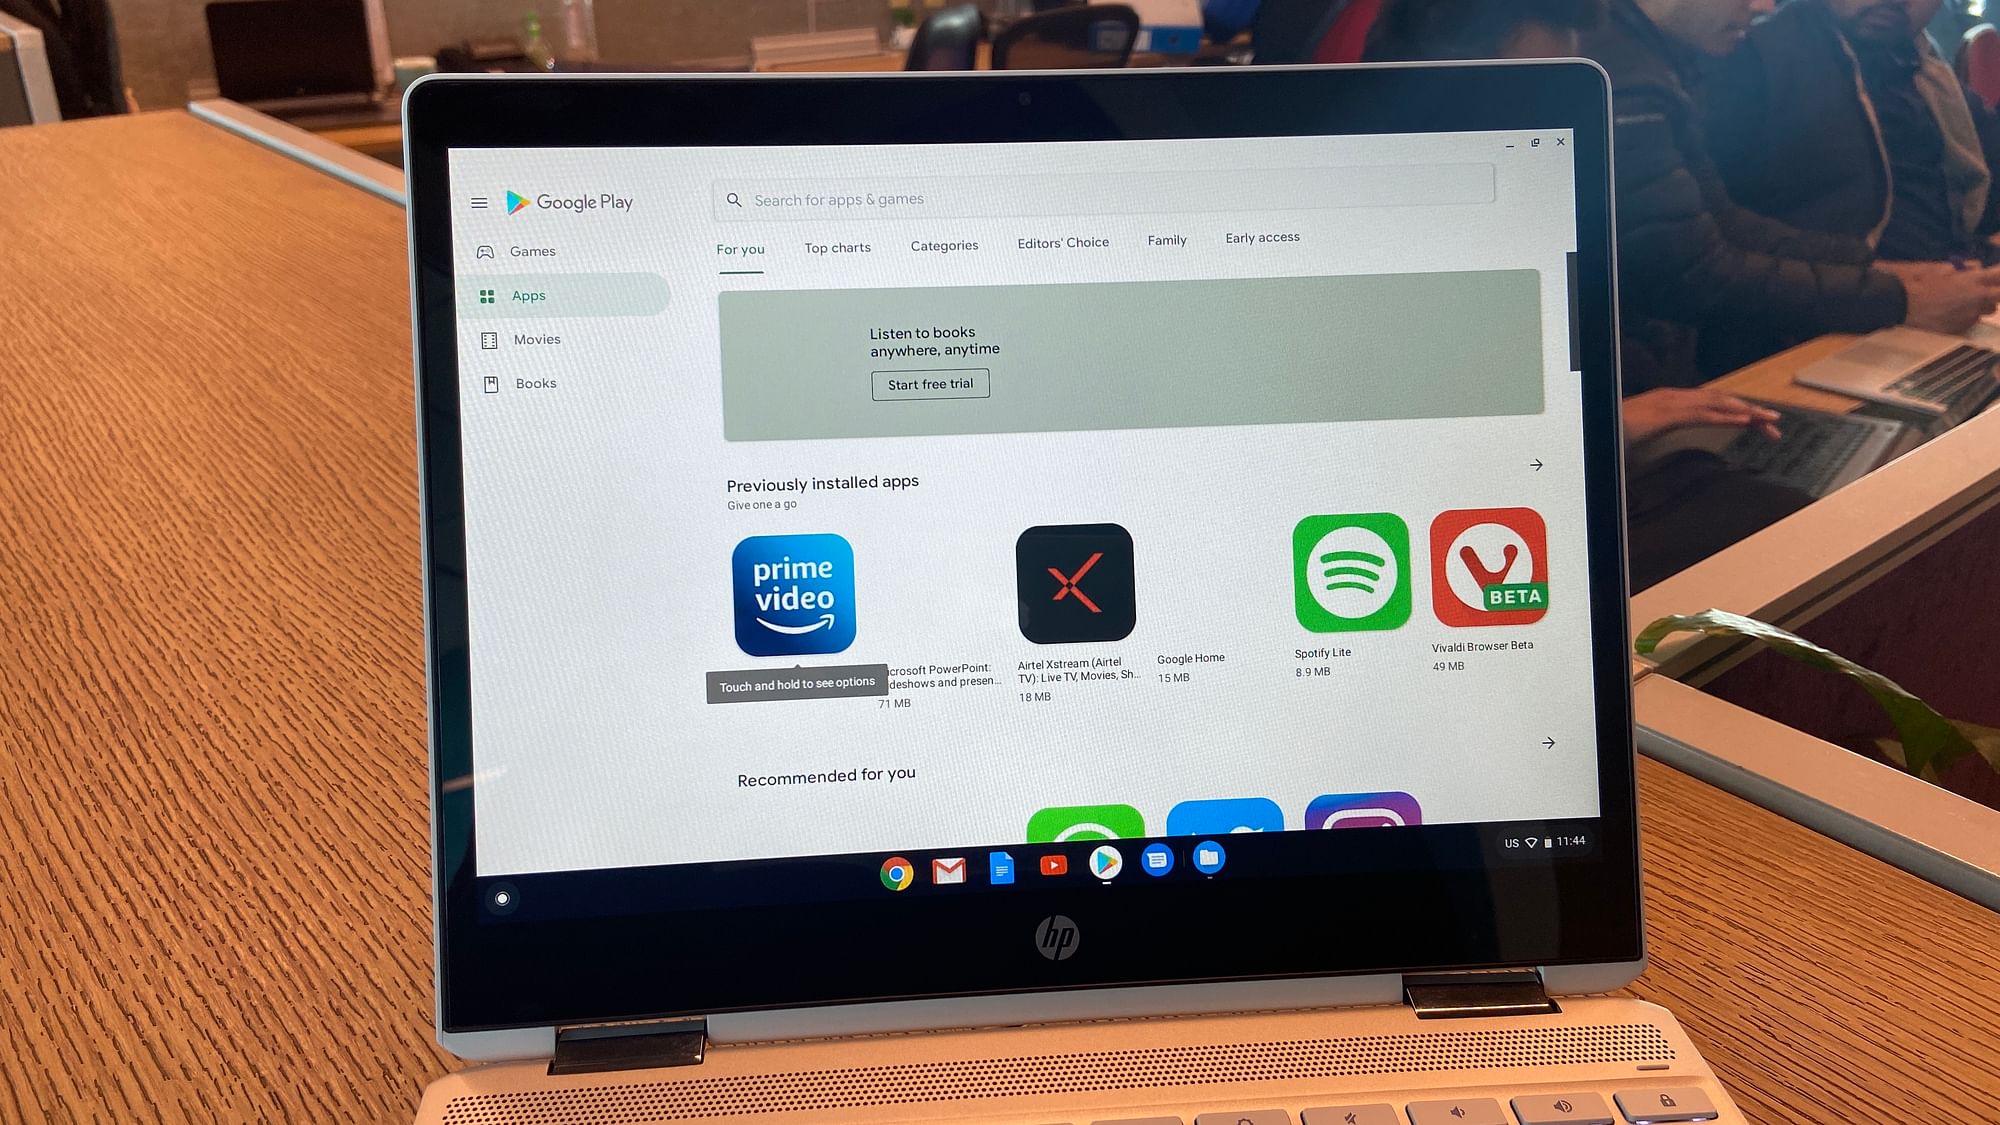 Google Chromebooks From HP Are Available in India, Should